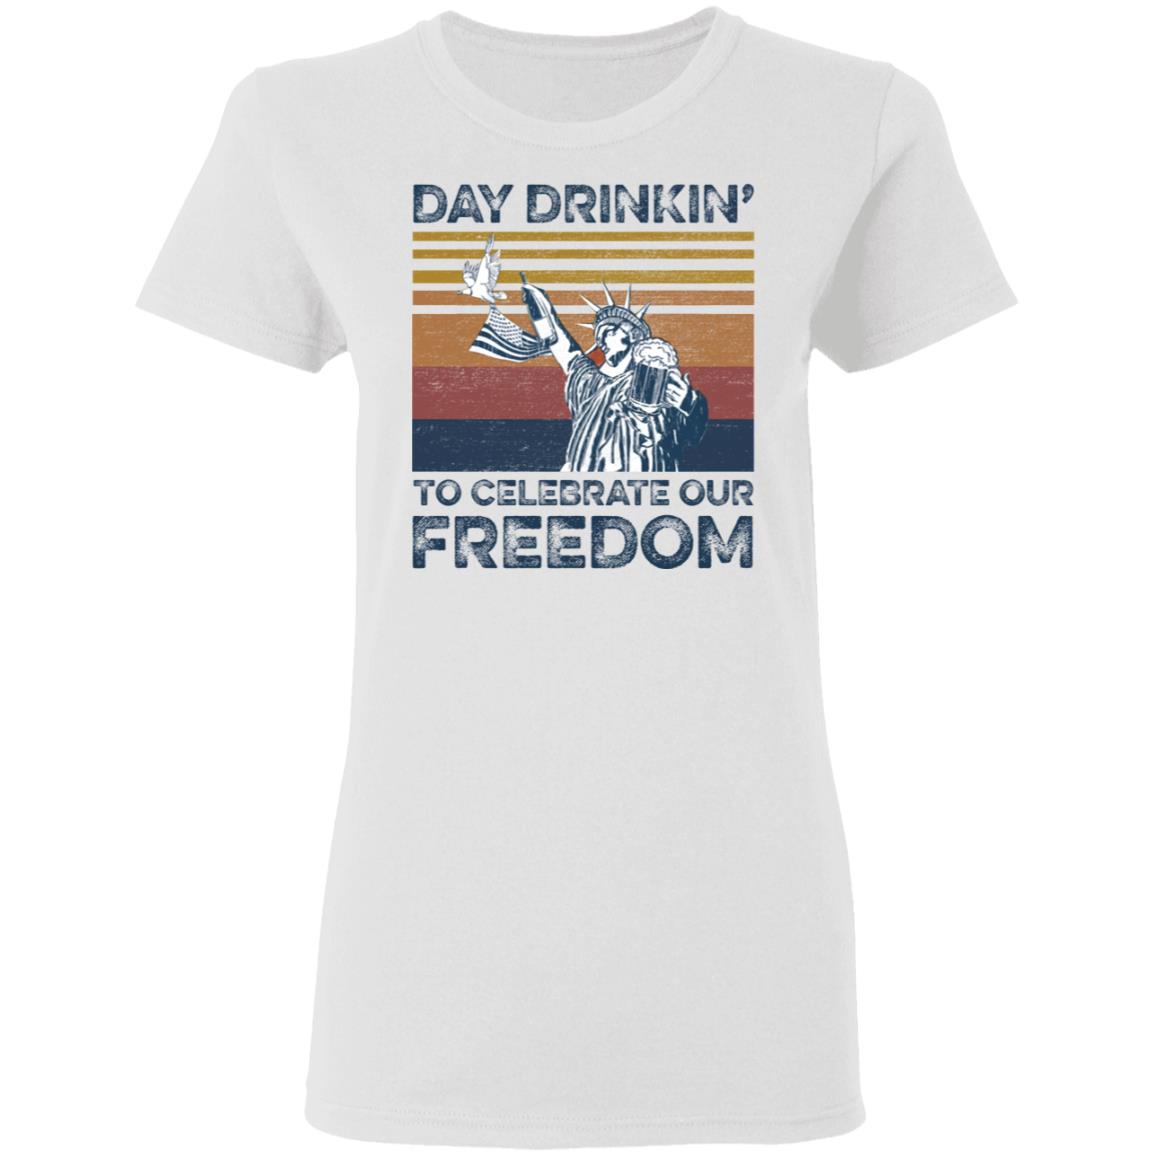 Day drinkin to celebrate our freedom shirt - Rockatee